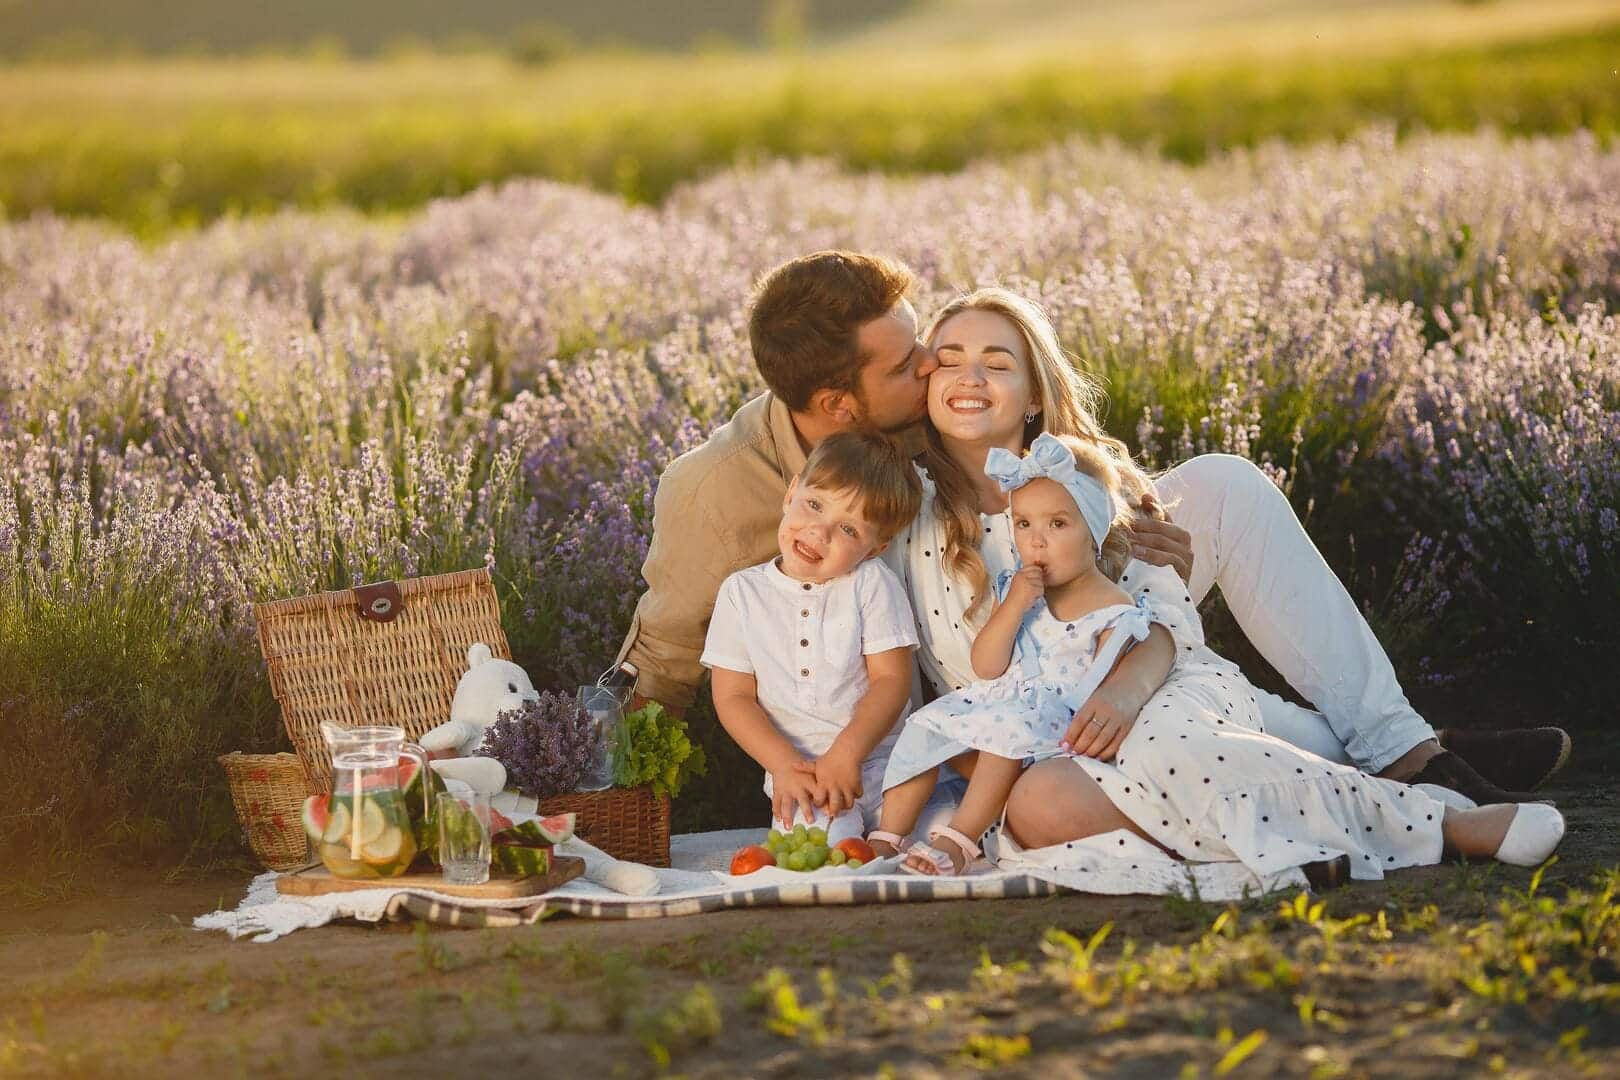 Family on picnic blanket with flowers in the background.